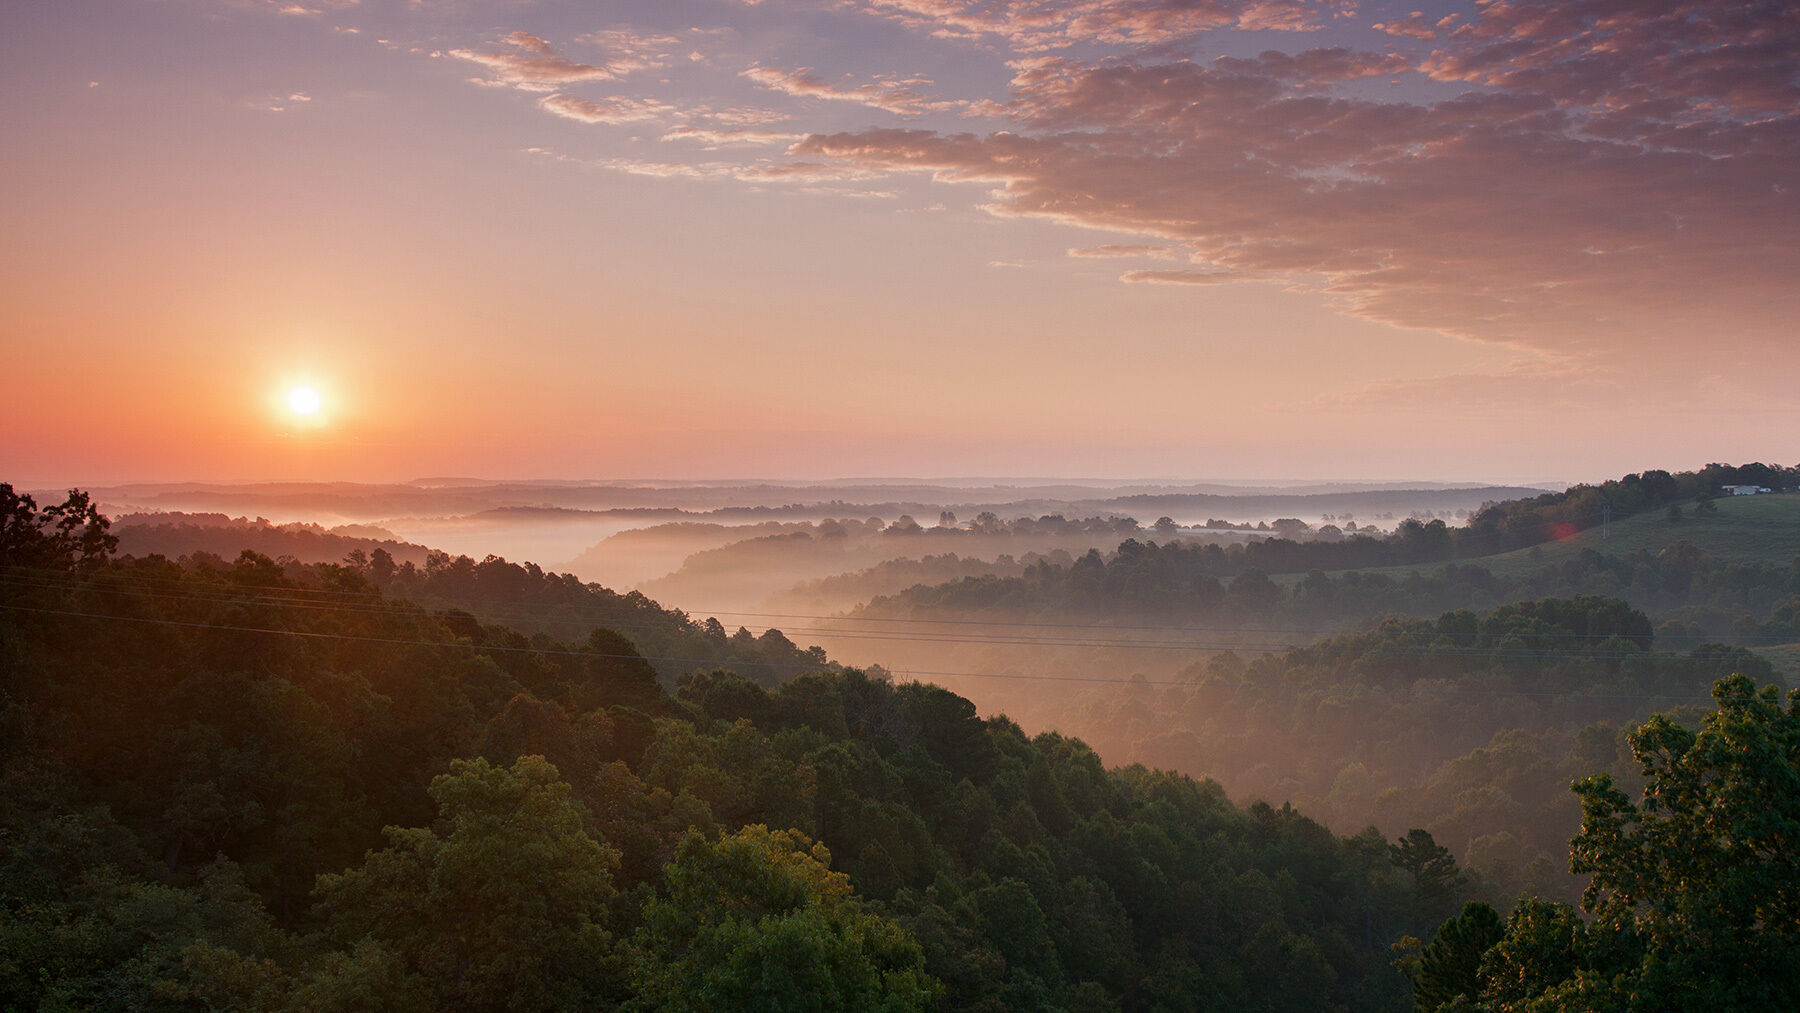 A beautiful sunrise over the hills of the Ozarks in Arkansas